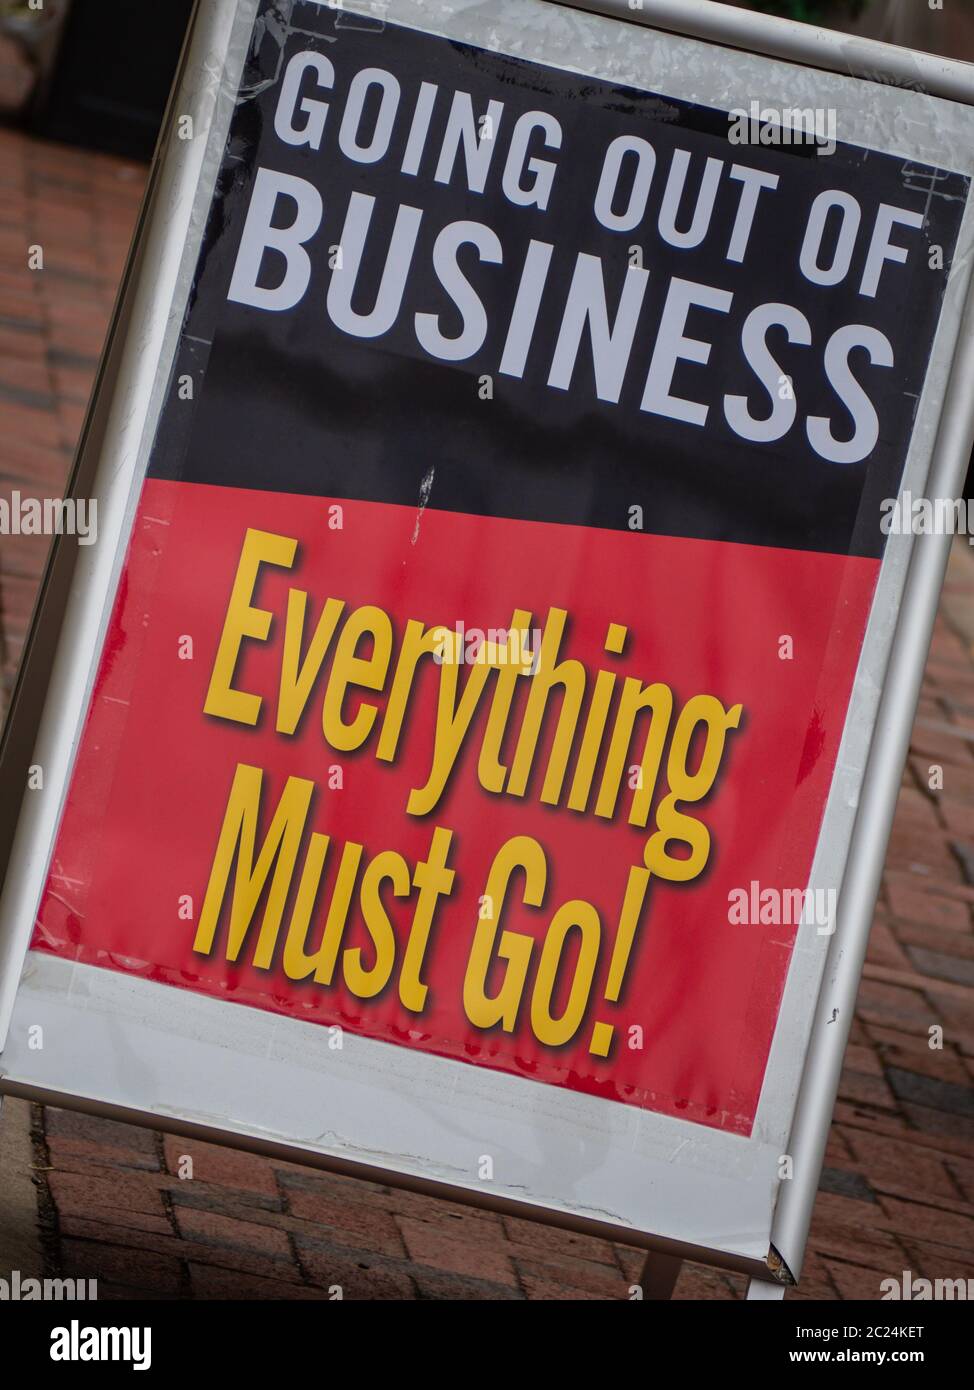 MONTCLAIR, NEW JERSEY, USA - NOVEMBER 22, 2019:  Closing down sale - Signage for Going out of Business sign - Every thing must go Stock Photo